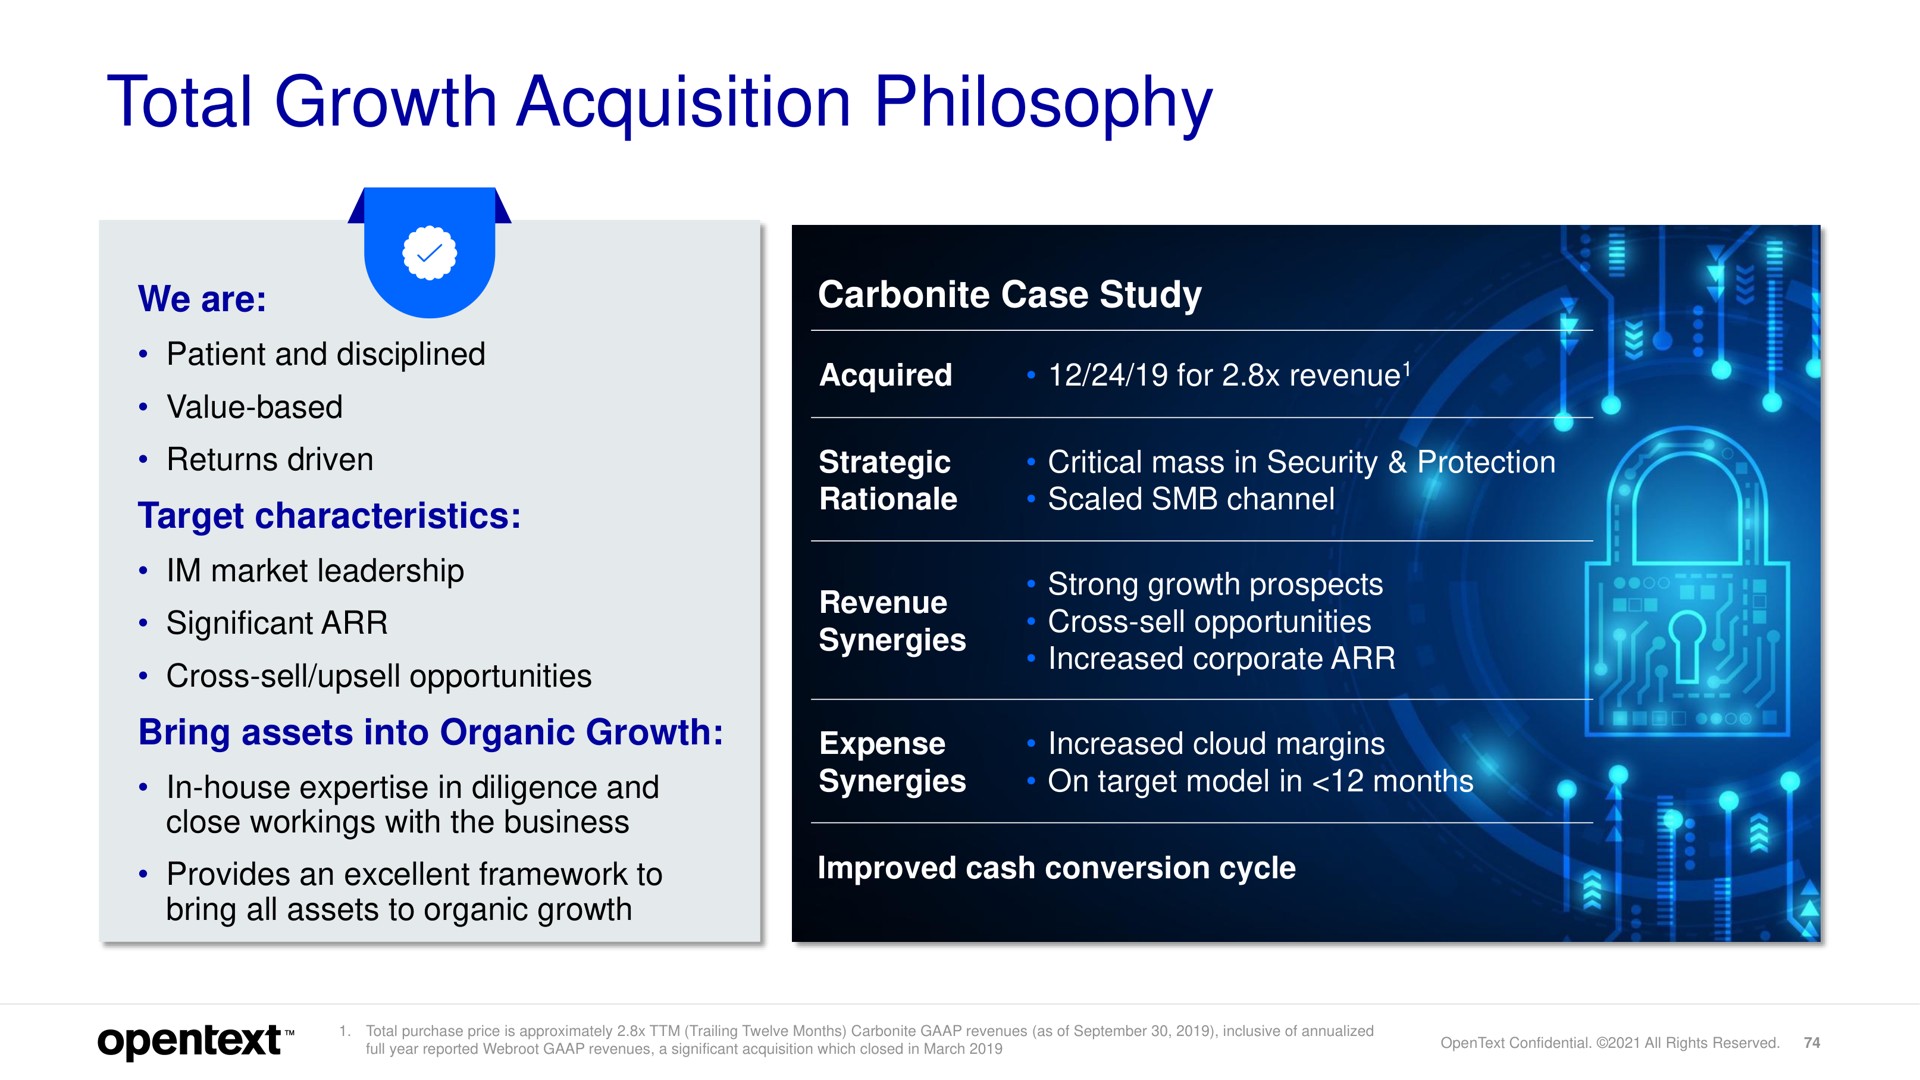 total growth acquisition philosophy | OpenText